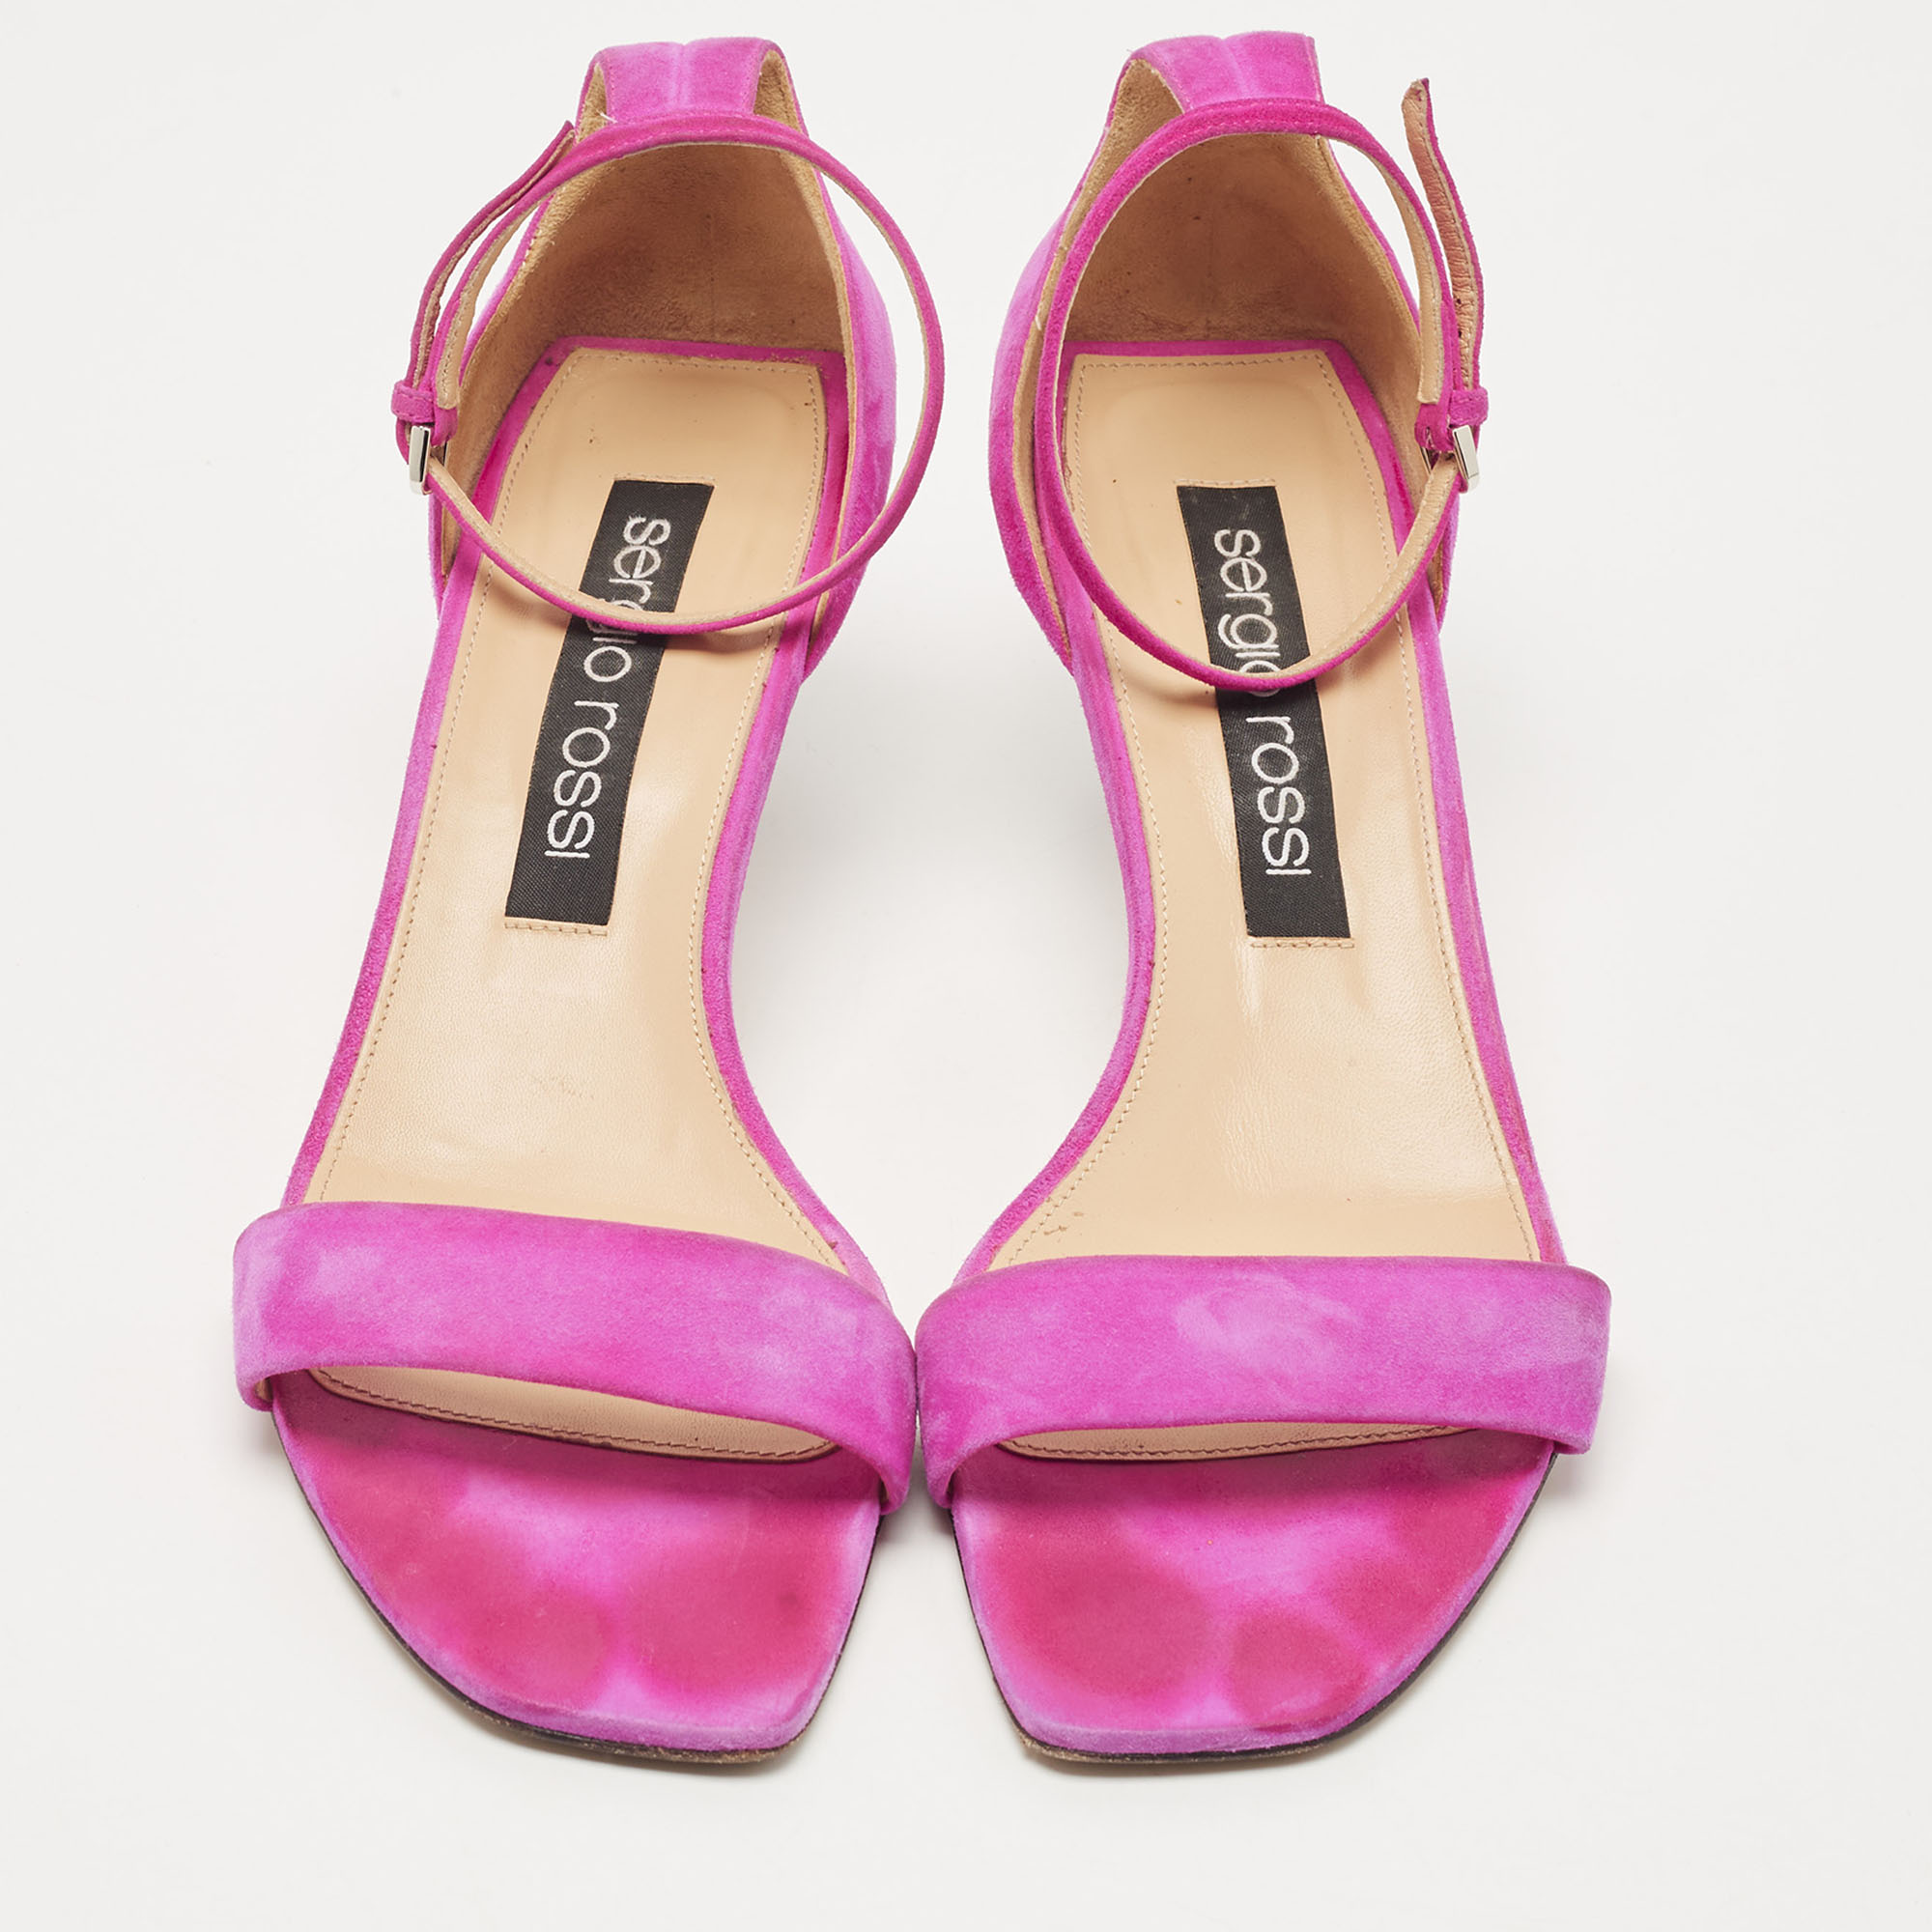 Sergio Rossi Pink Suede Ankle Strap Sandals Size 41